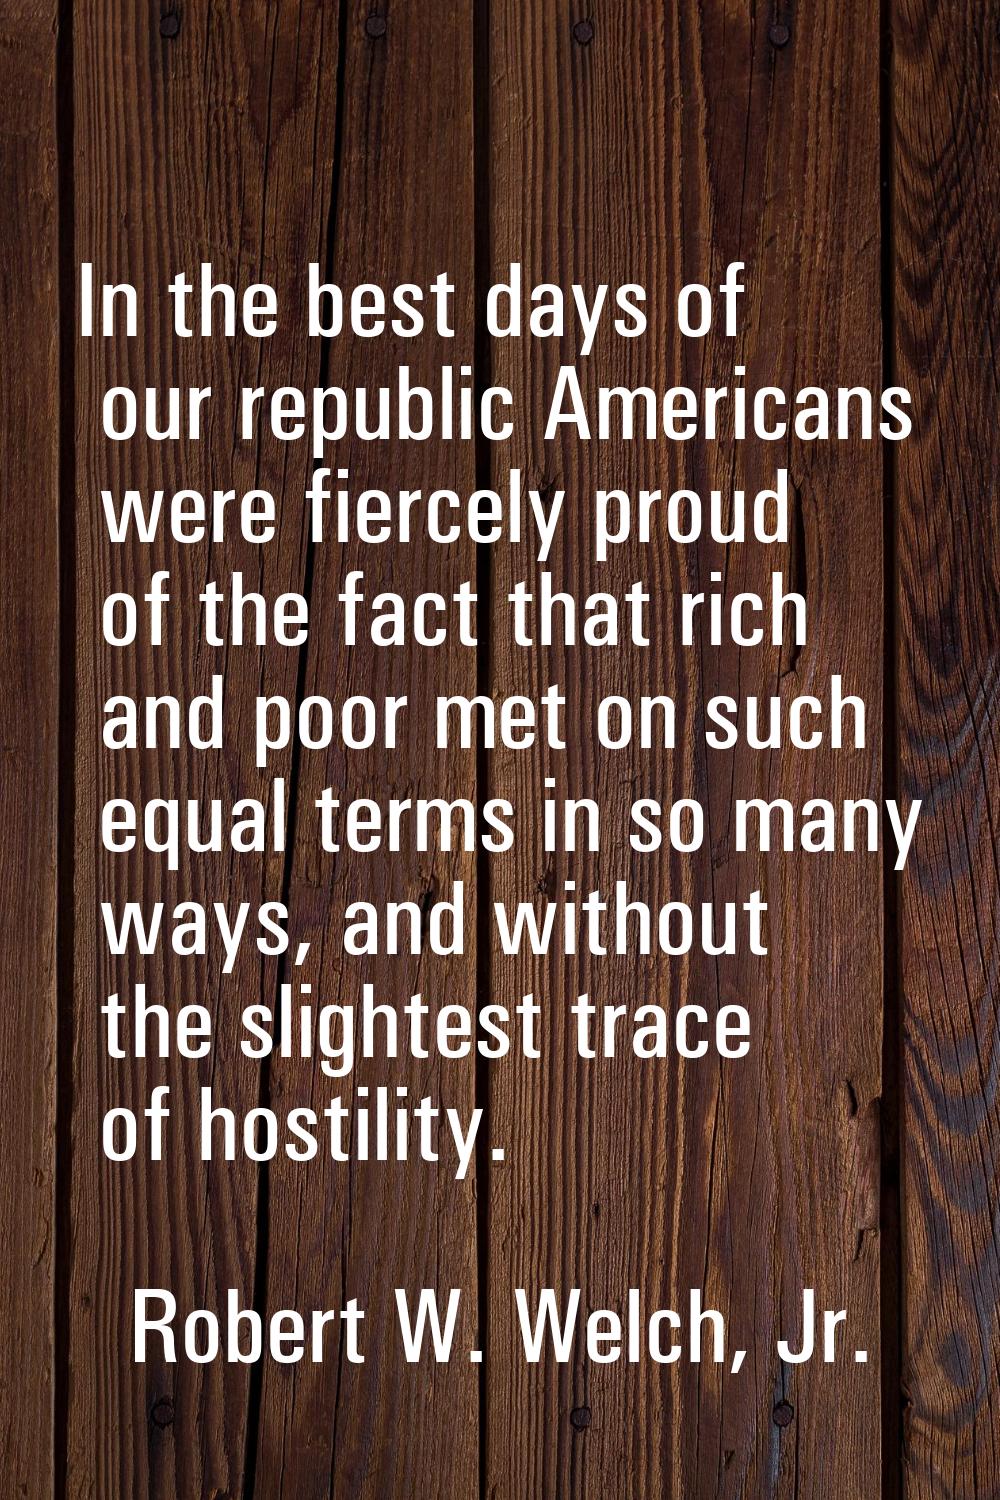 In the best days of our republic Americans were fiercely proud of the fact that rich and poor met o